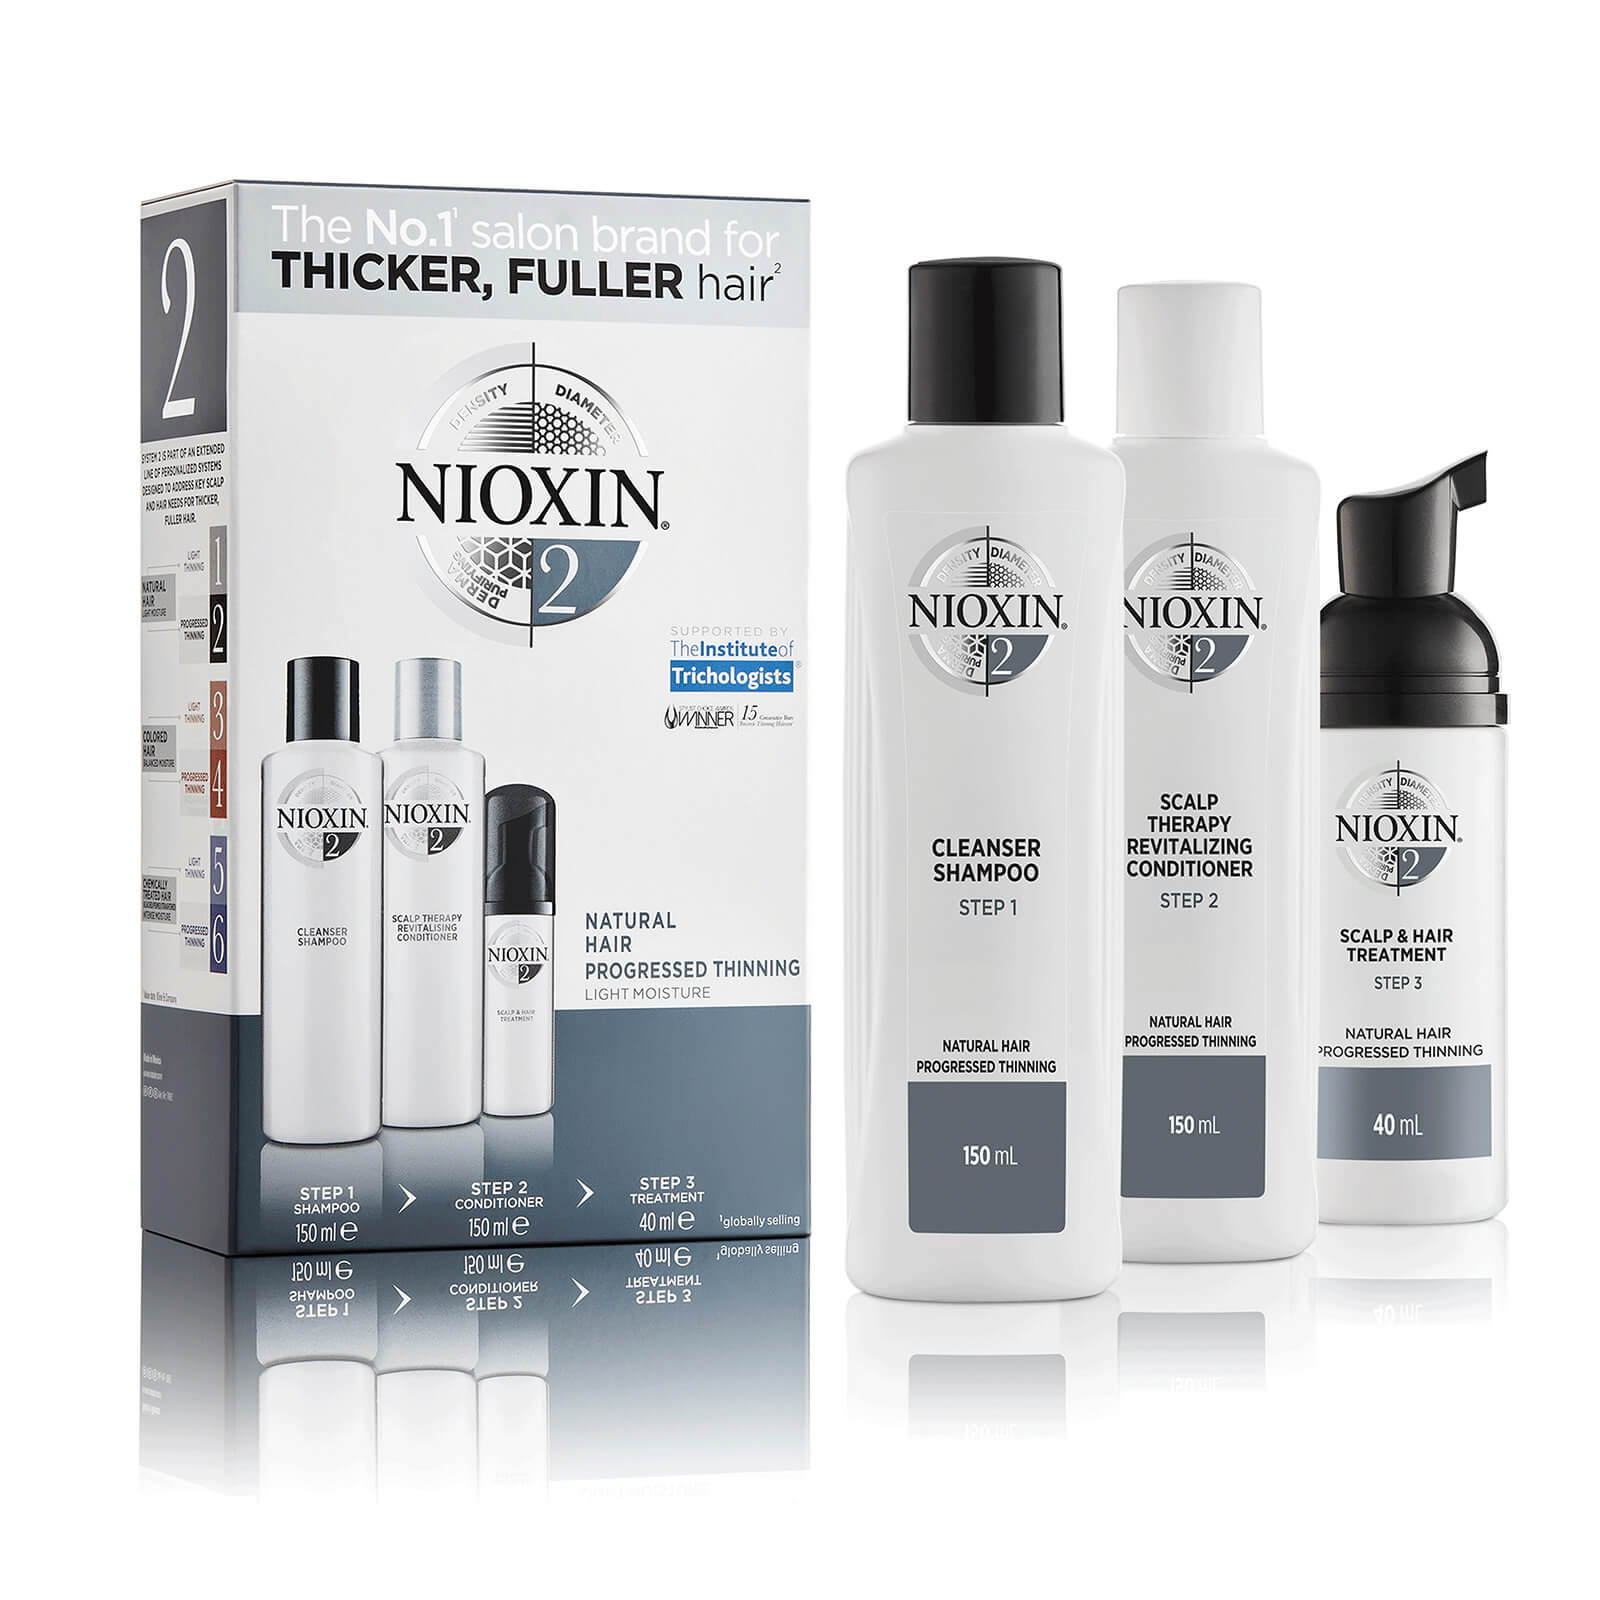 Image of Kit Prova 3-Part System 2 for Natural Hair with Progressed Thinning NIOXIN